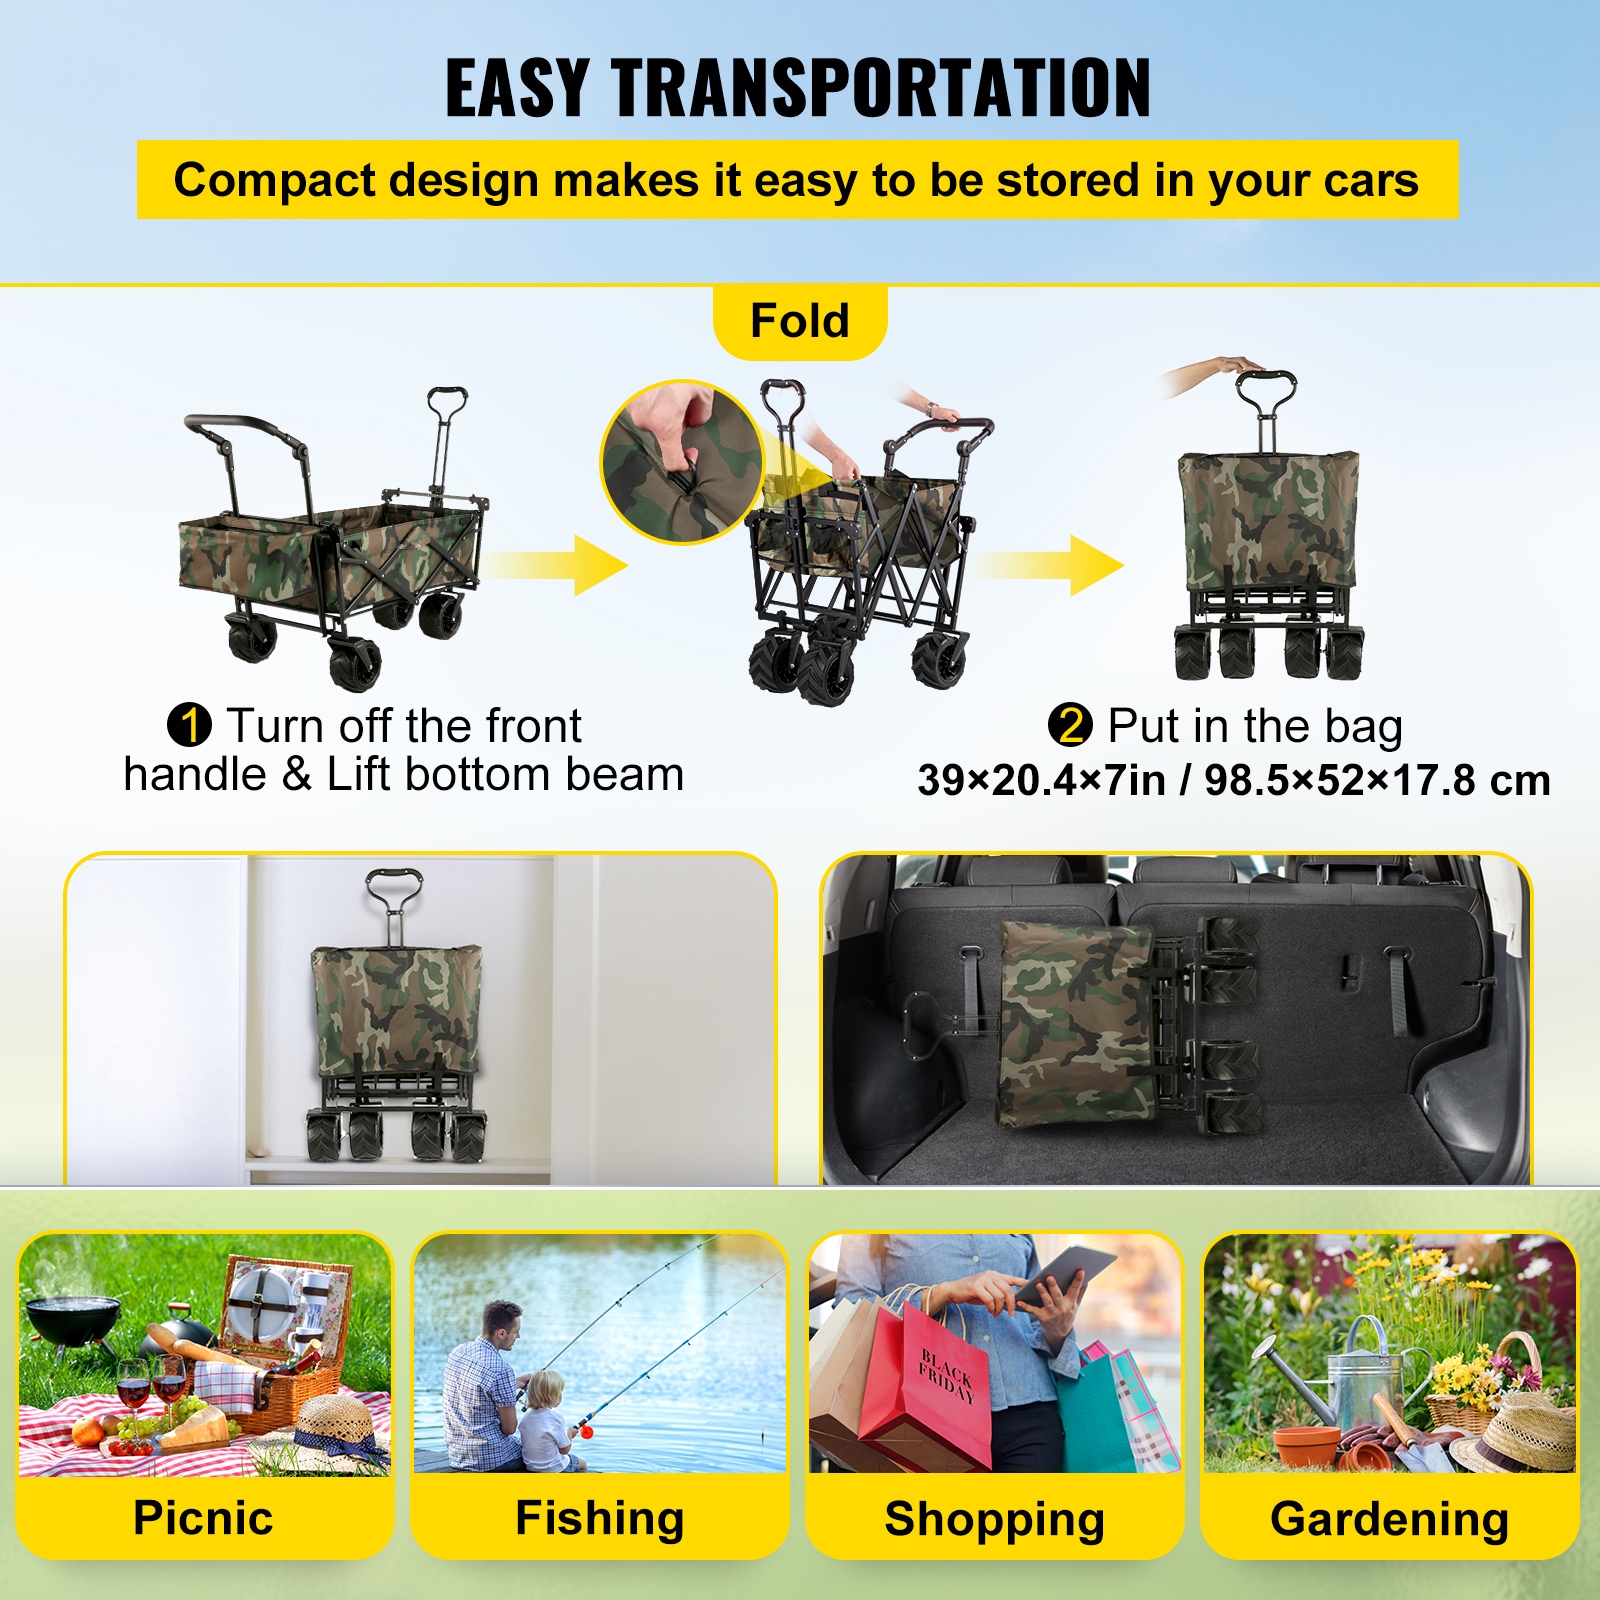 VEVOR 3 cu.ft. Collapsible Folding Outdoor Utility Wagon Steel Collapsible Garden Cart with Removable Canopy, Camouflage